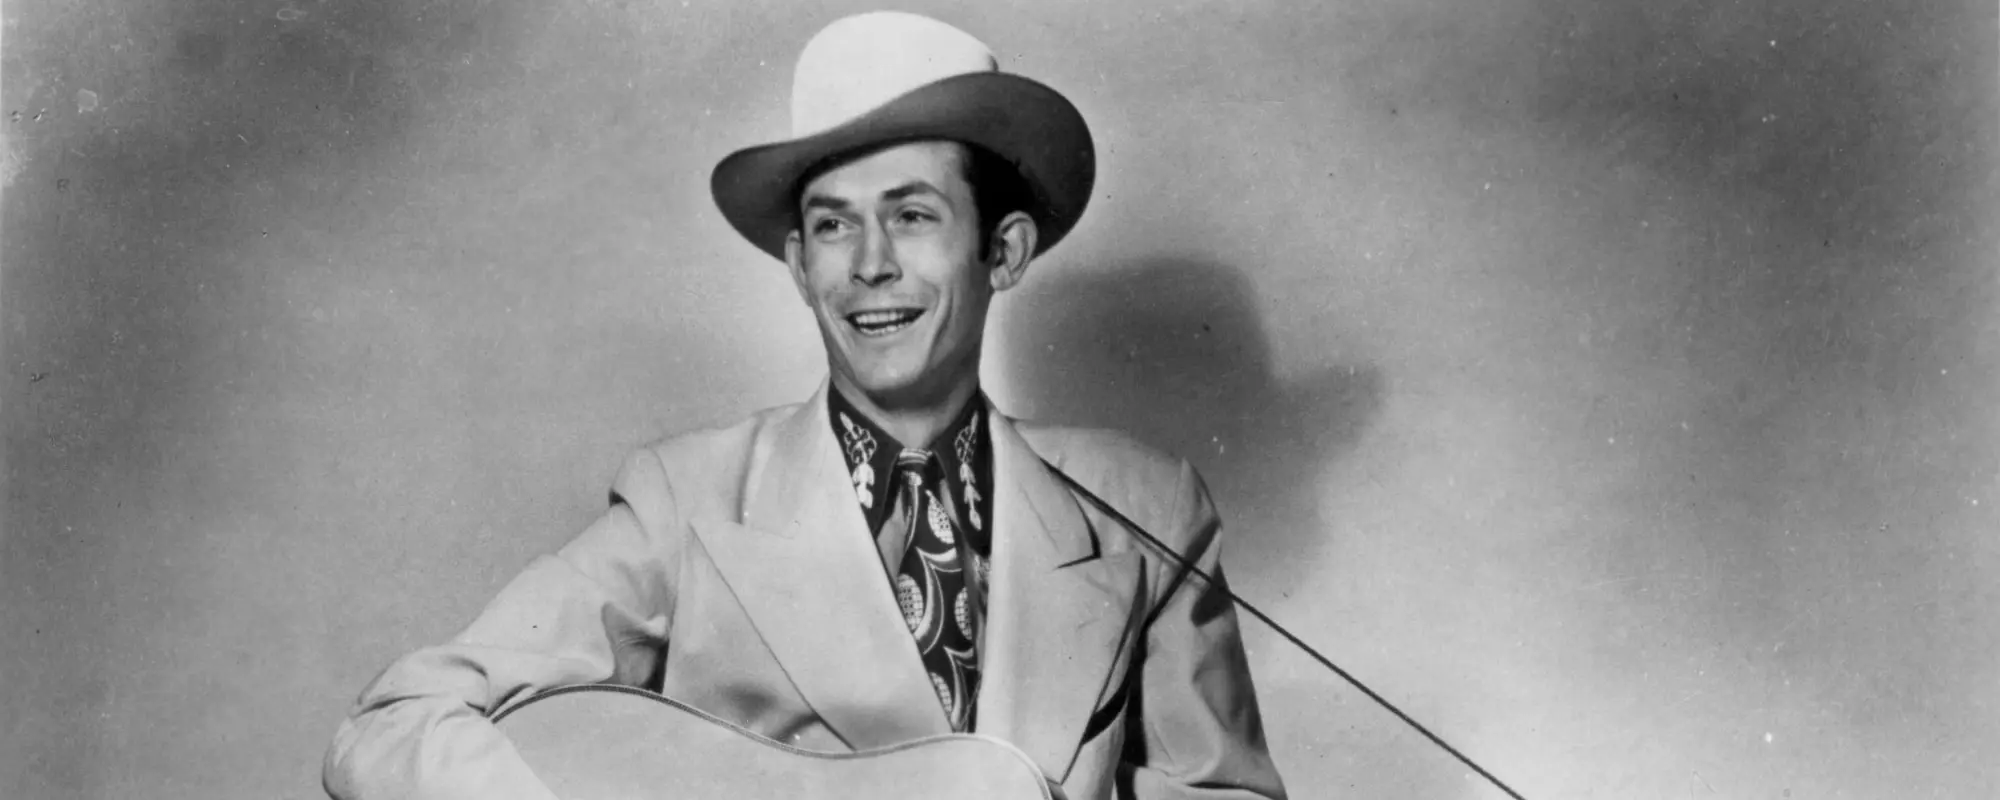 The Louisiana Hayride, the Radio Show that Launched Hank Williams & Elvis Presley, Made Their Broadcast Debut on This Day in 1948